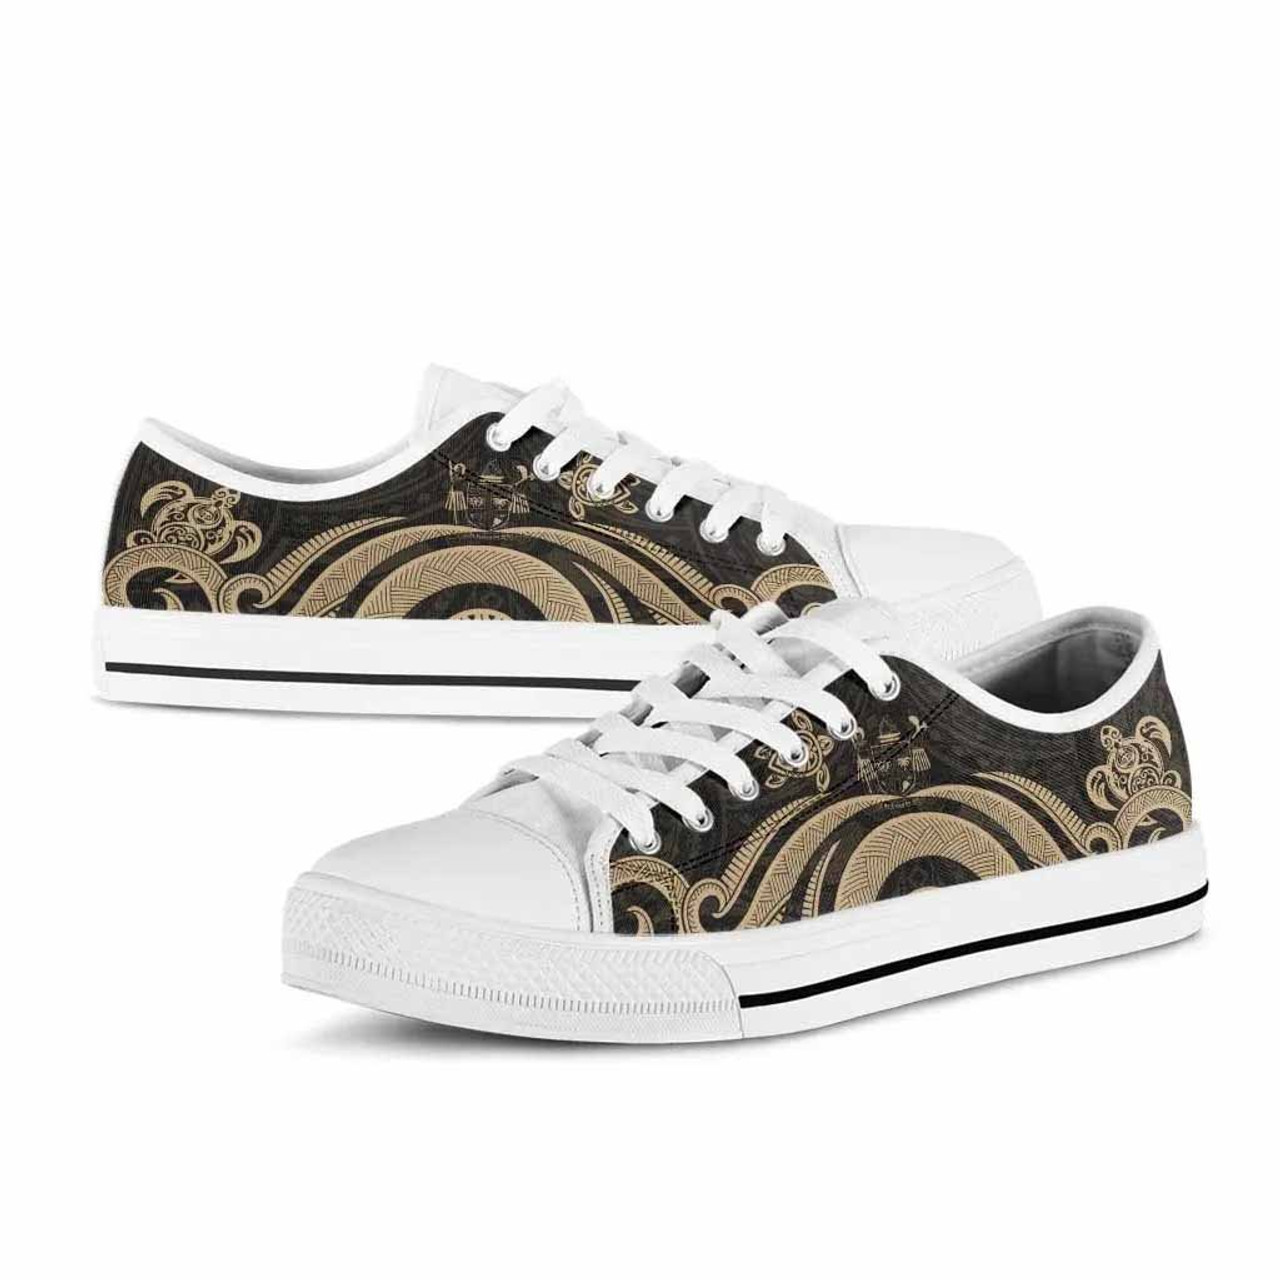 Fiji Low Top Canvas Shoes - Gold Tentacle Turtle Crest 8